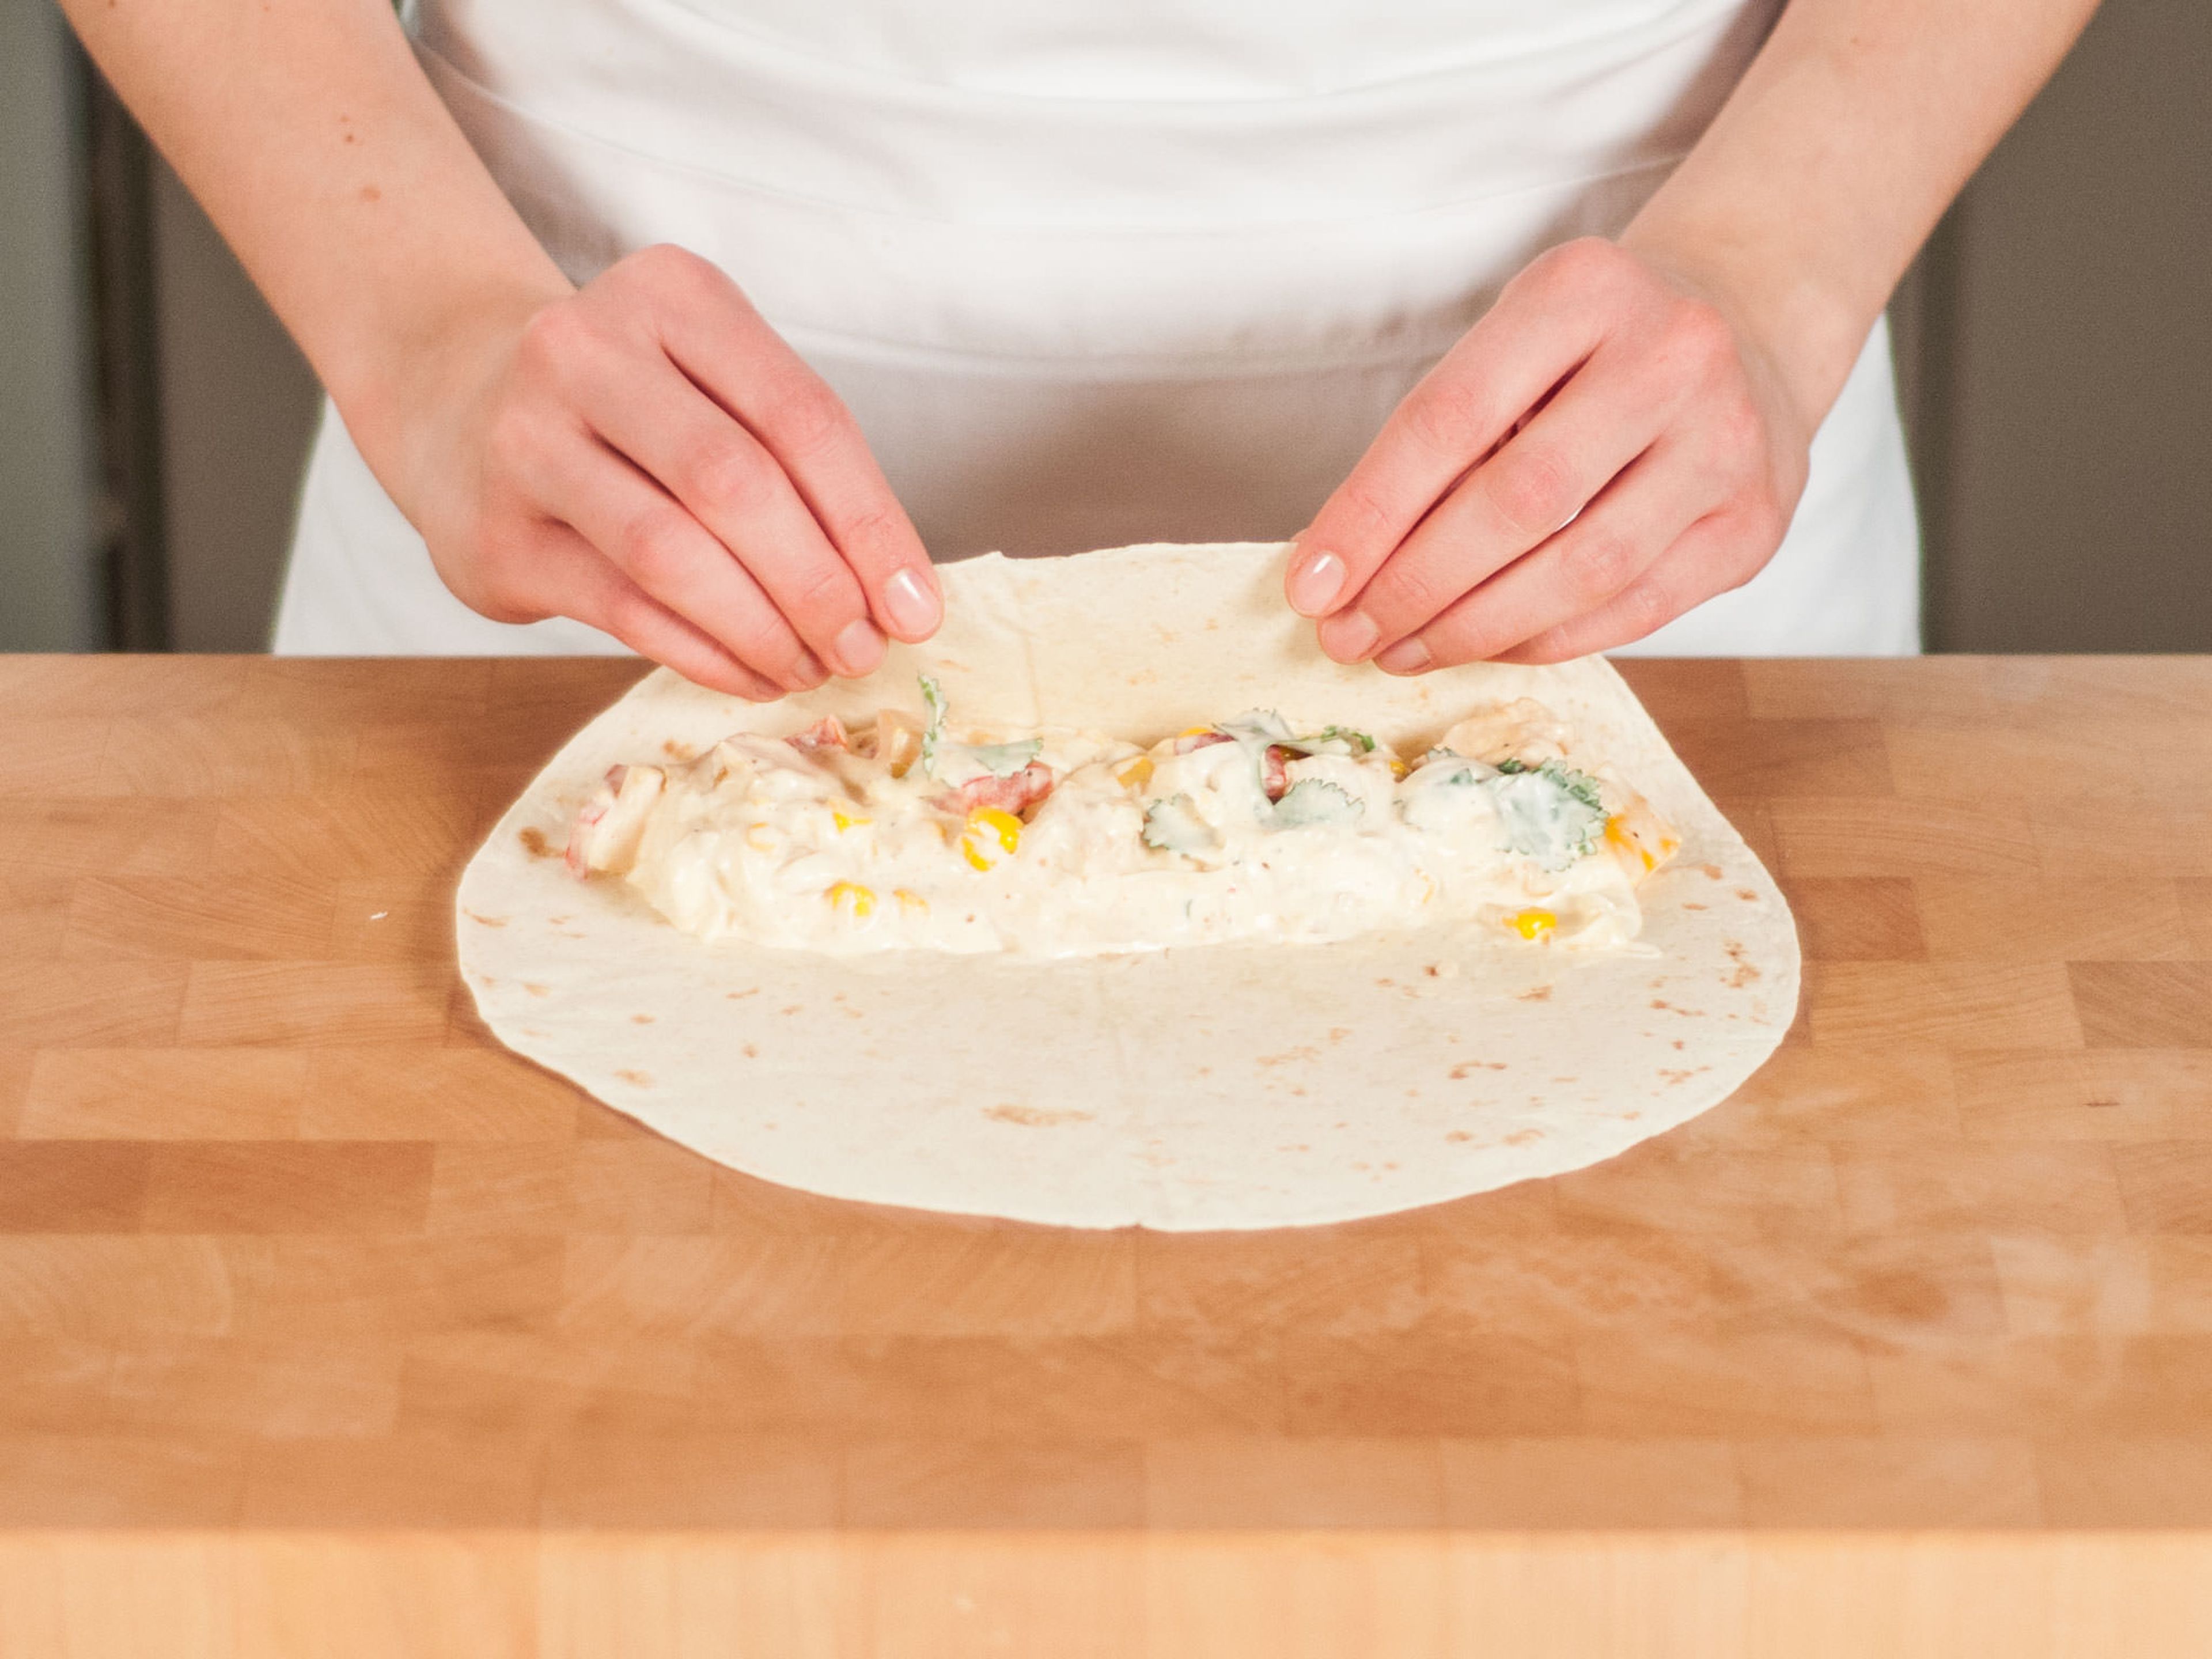 Place some of the filling into a tortilla and roll tightly. Arrange enchiladas in a baking dish, top with the rest of the cheese, and bake in the oven at 160°C/325°F for approx. 8 - 10 min. until cheese is melted. Enjoy right away!